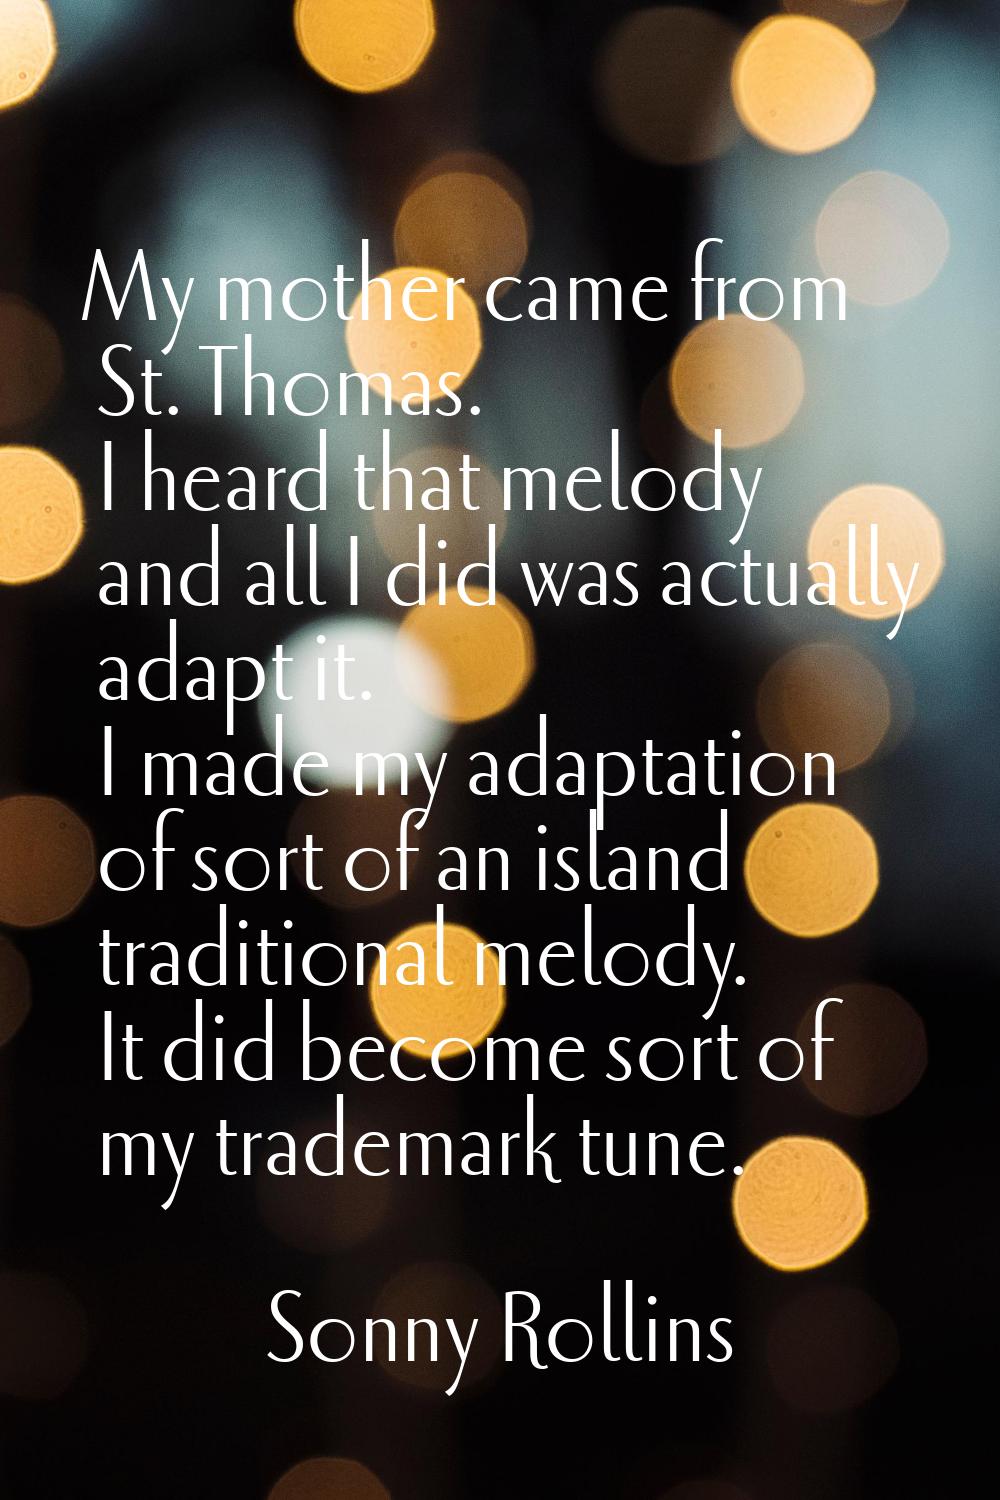 My mother came from St. Thomas. I heard that melody and all I did was actually adapt it. I made my 